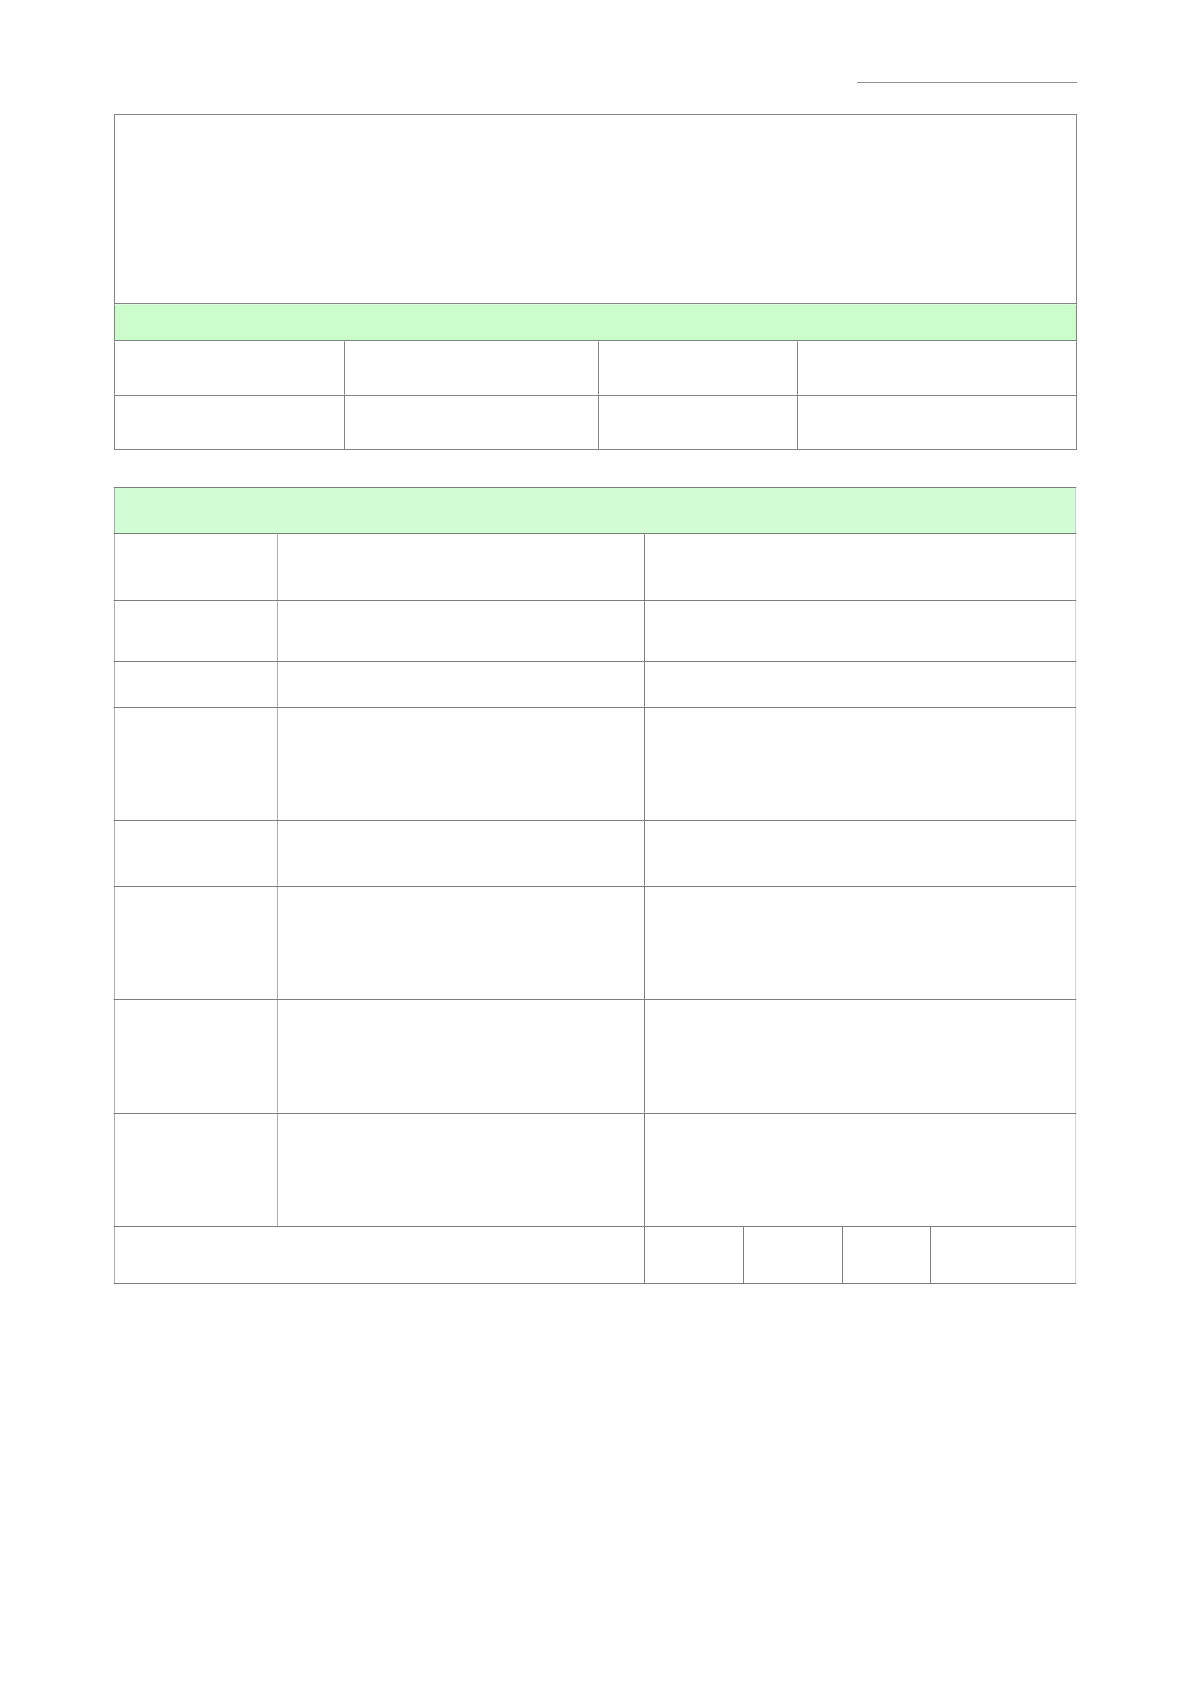 Production Schedule Template 2